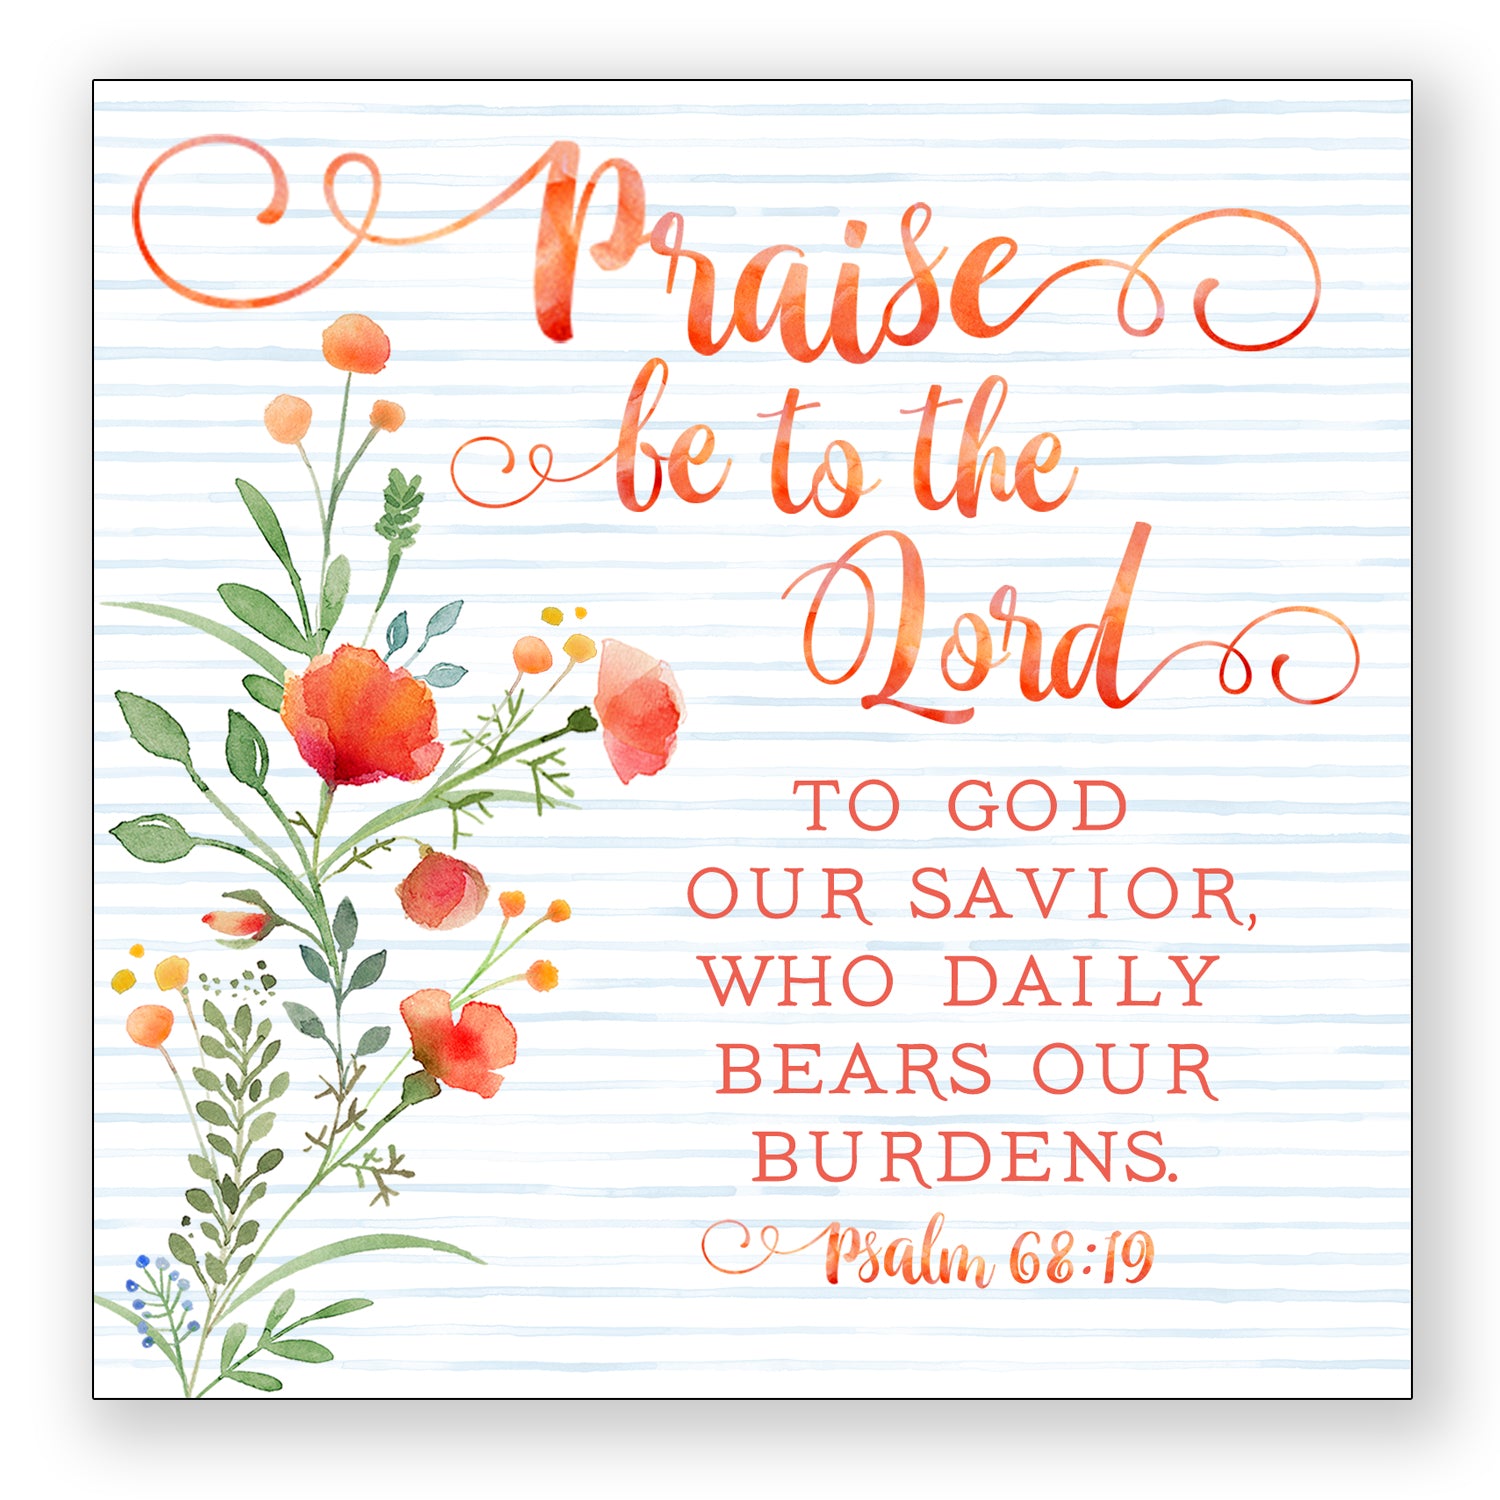 Praise Be To The Lord (Psalm 68:19) - Frameable Print